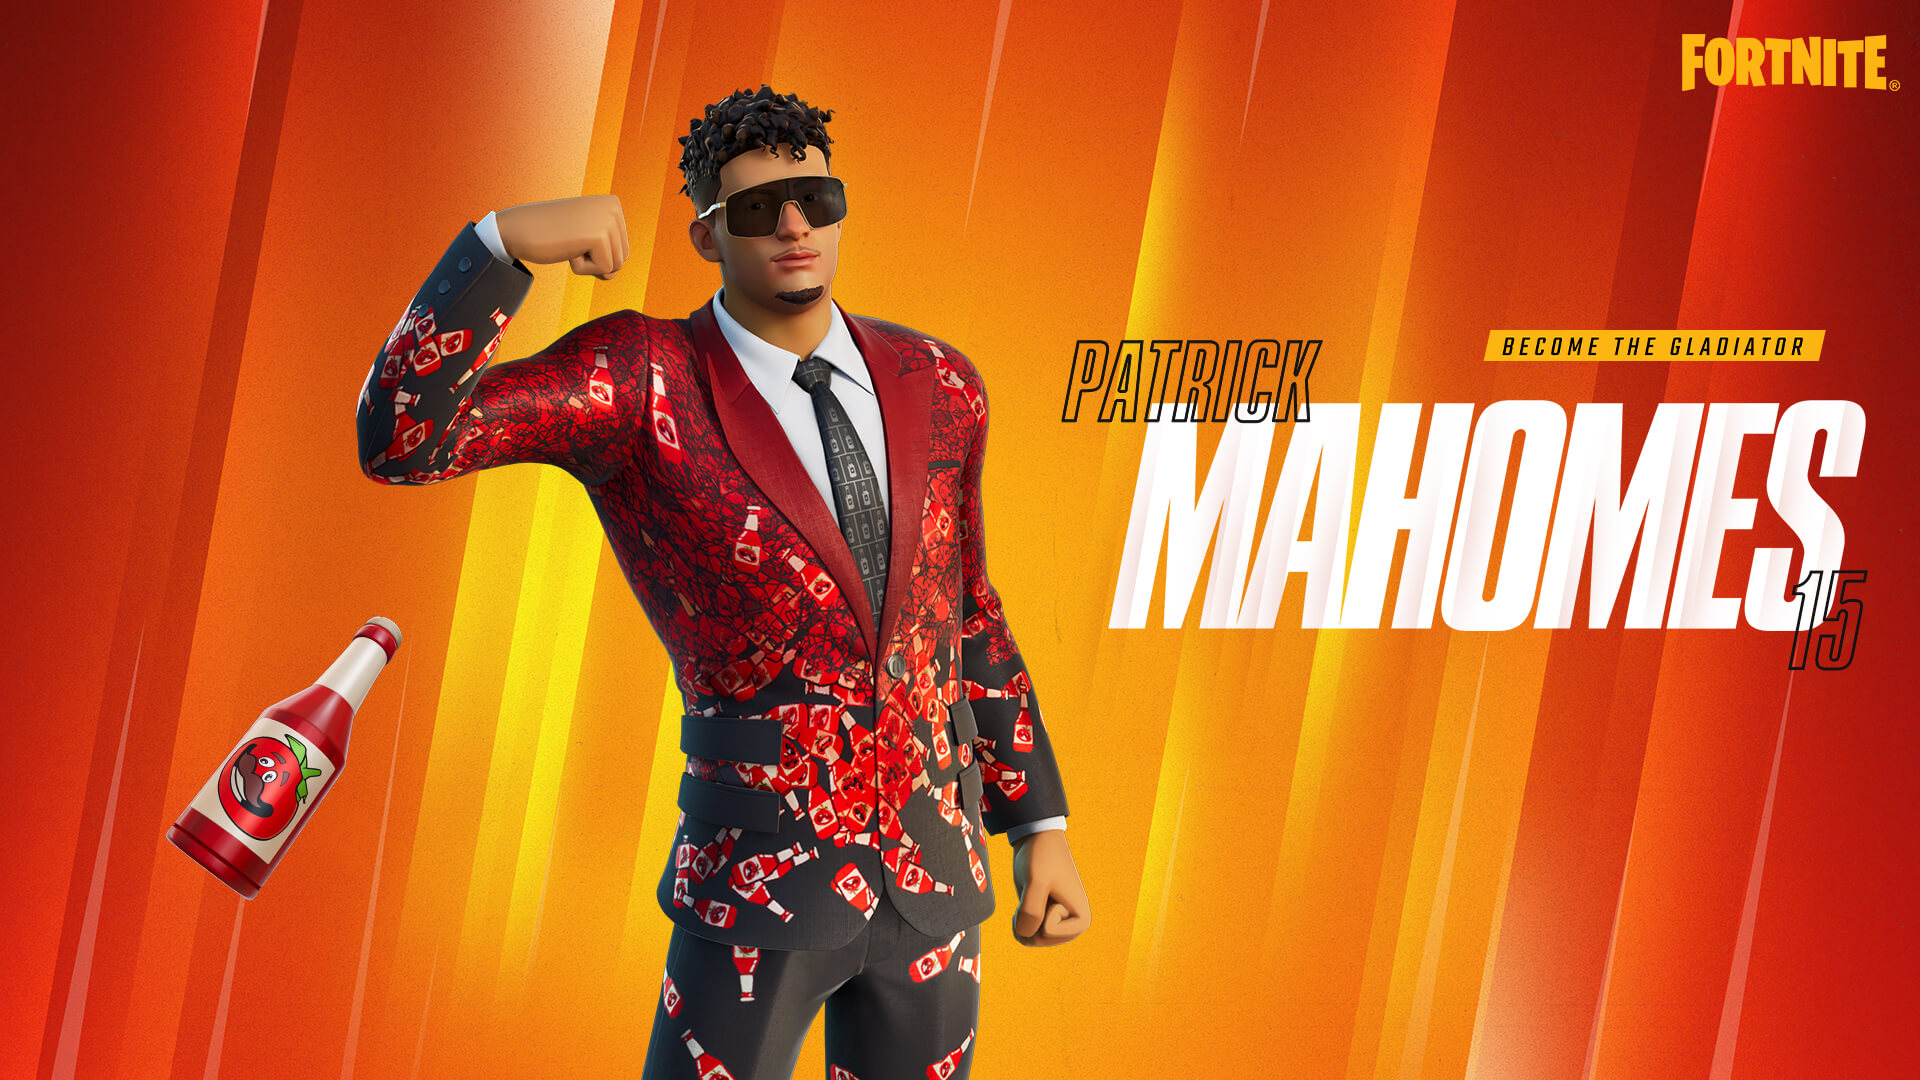 NFL Quarterback & MVP Patrick Mahomes Makes a Play in the Fortnite Icon Series